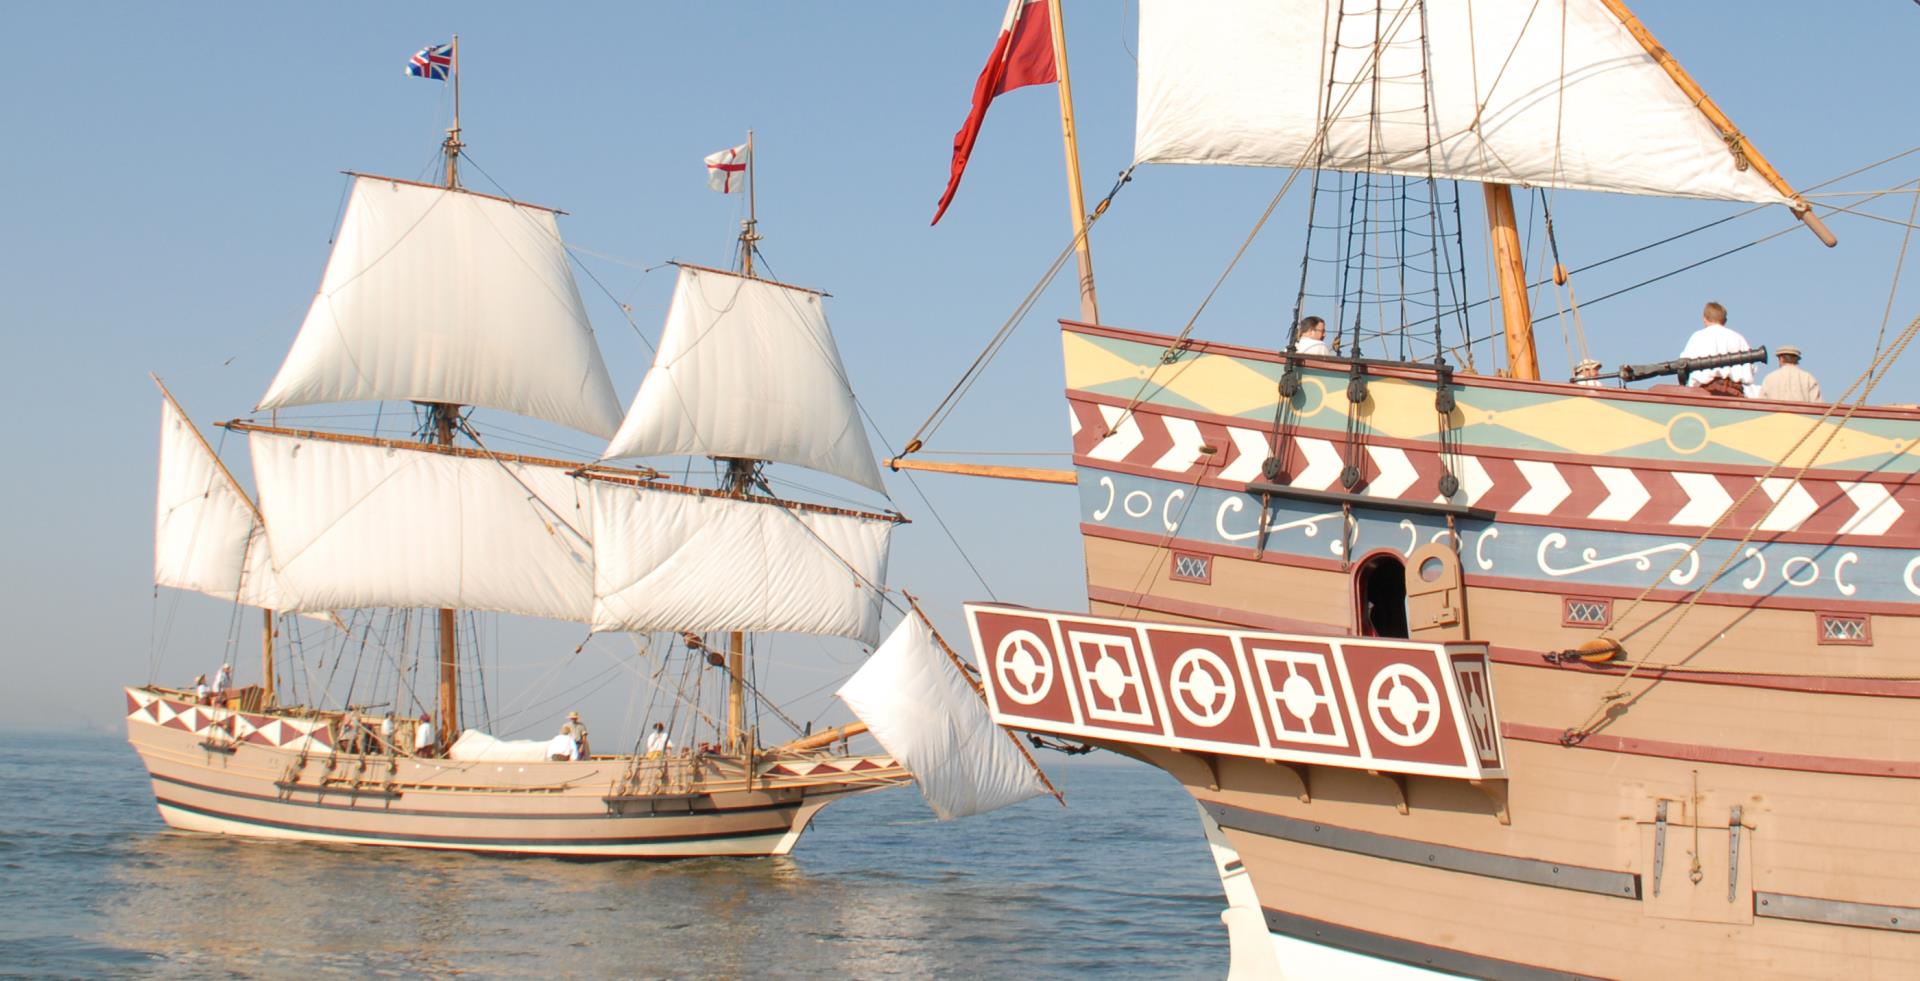 Jamestown Settlement ships, Godspeed and Susan Constant, under sail in the Chesapeake Bay